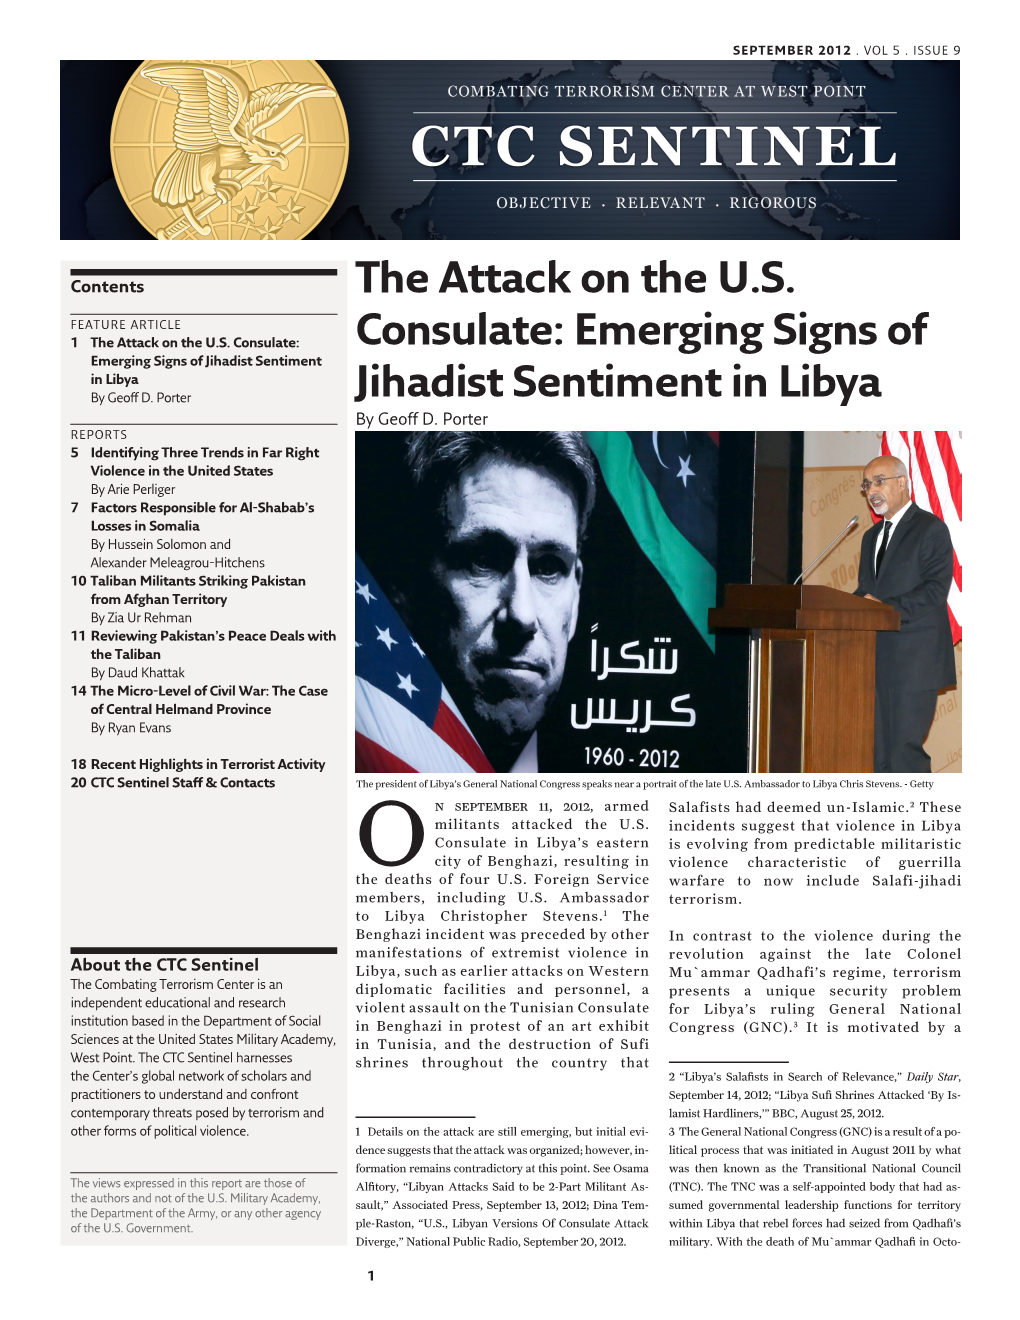 The Attack on the U.S. Consulate: Emerging Signs of Jihadist